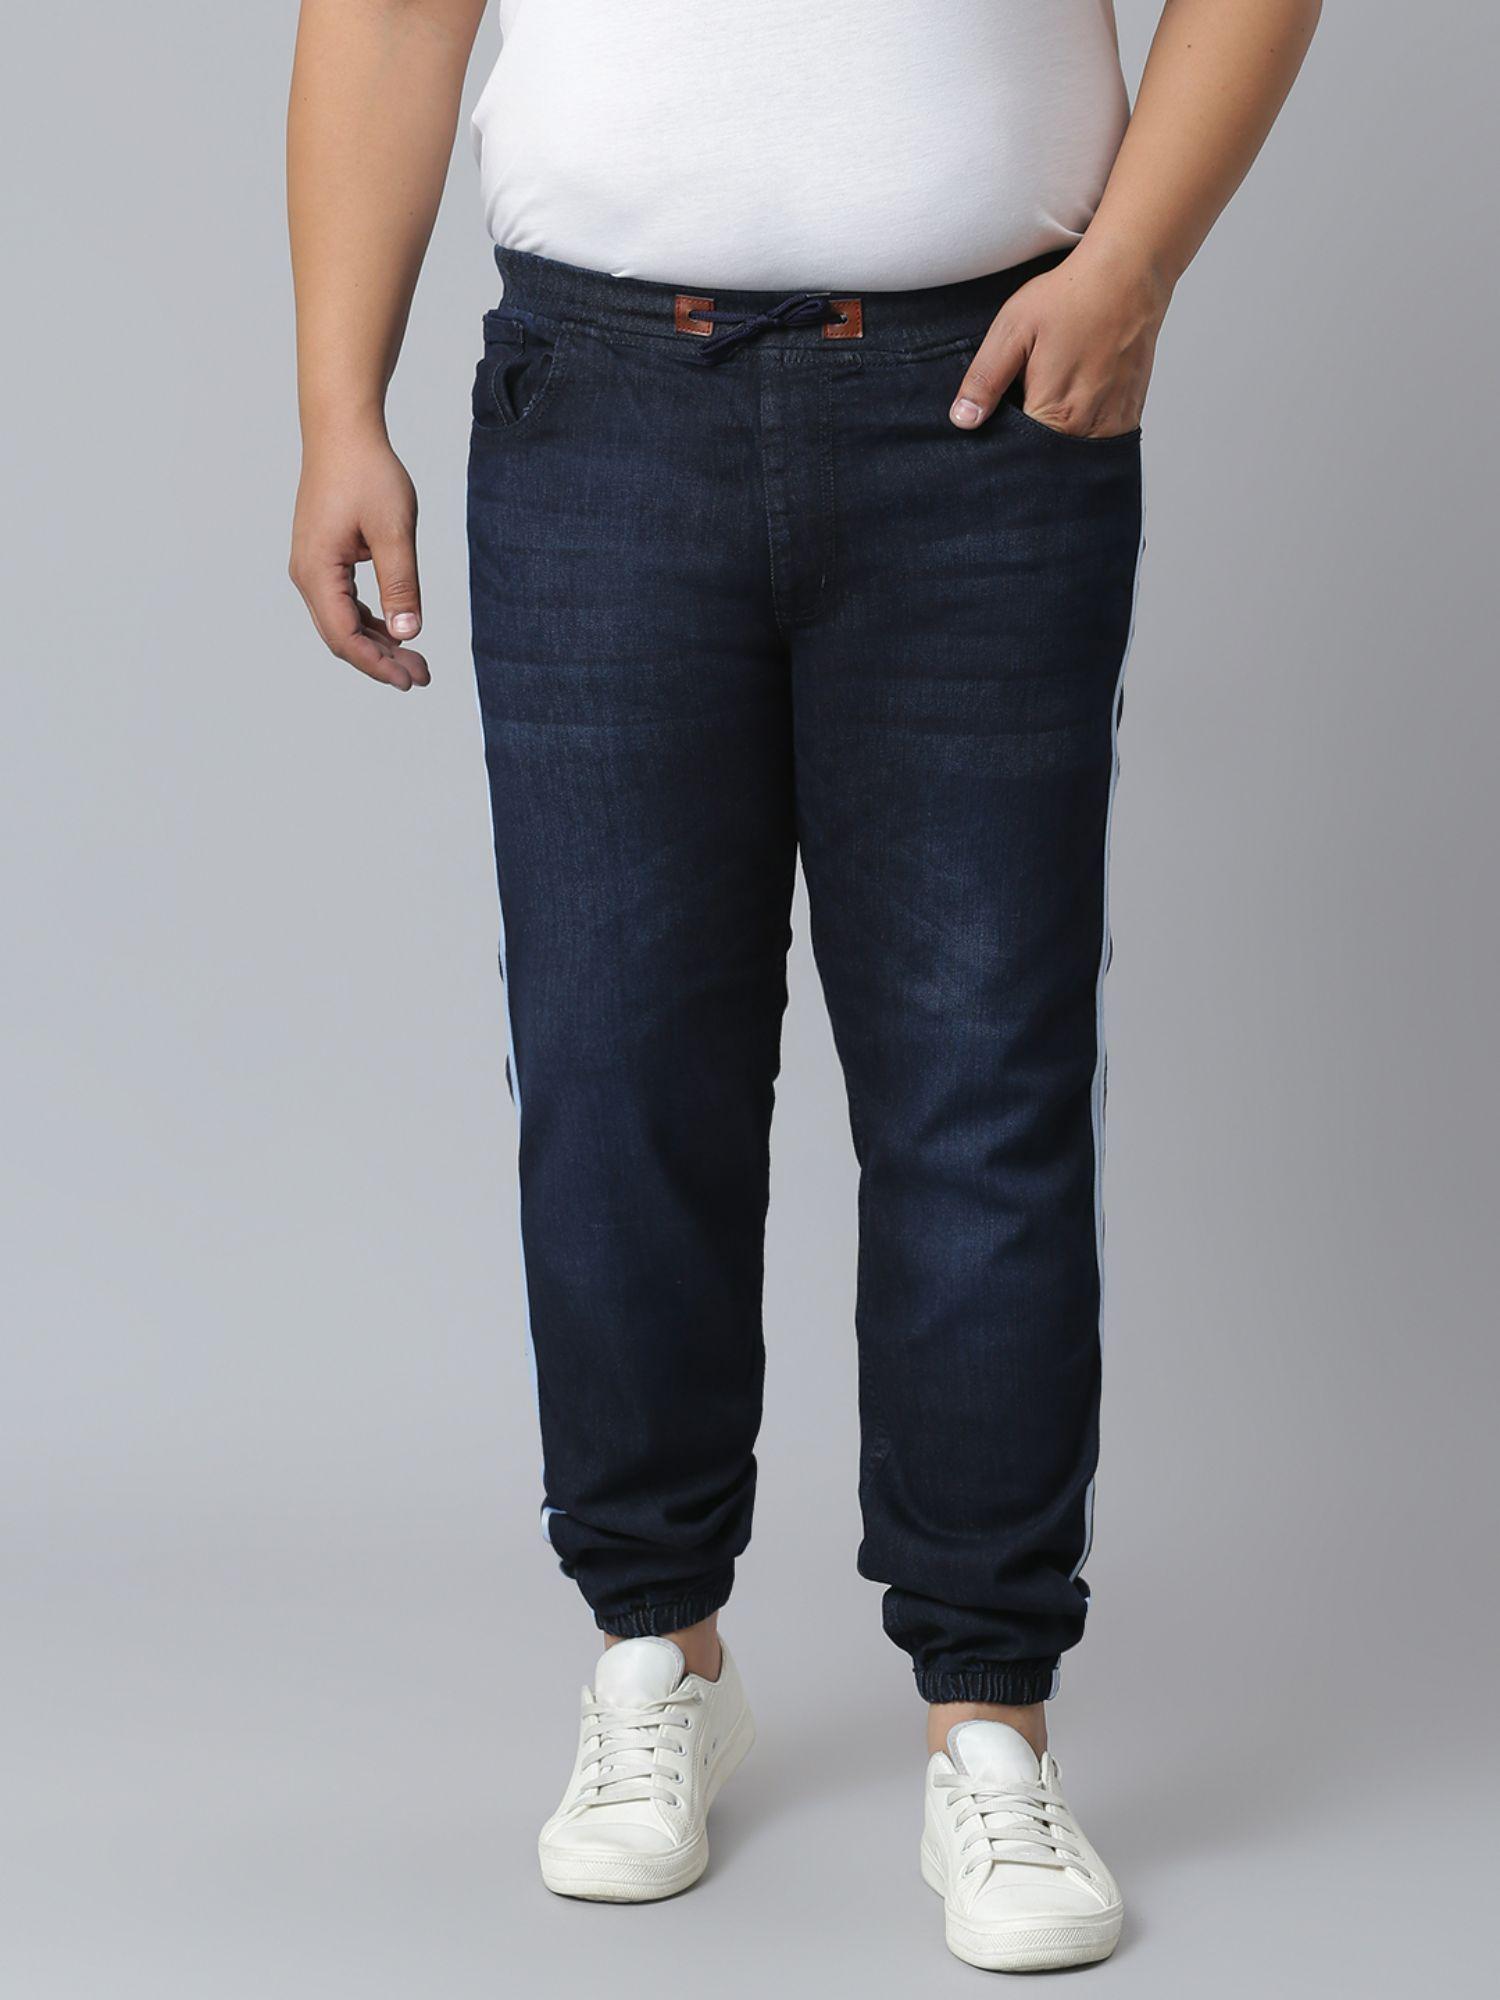 men's solid stylish casual denim jeans,navy blue